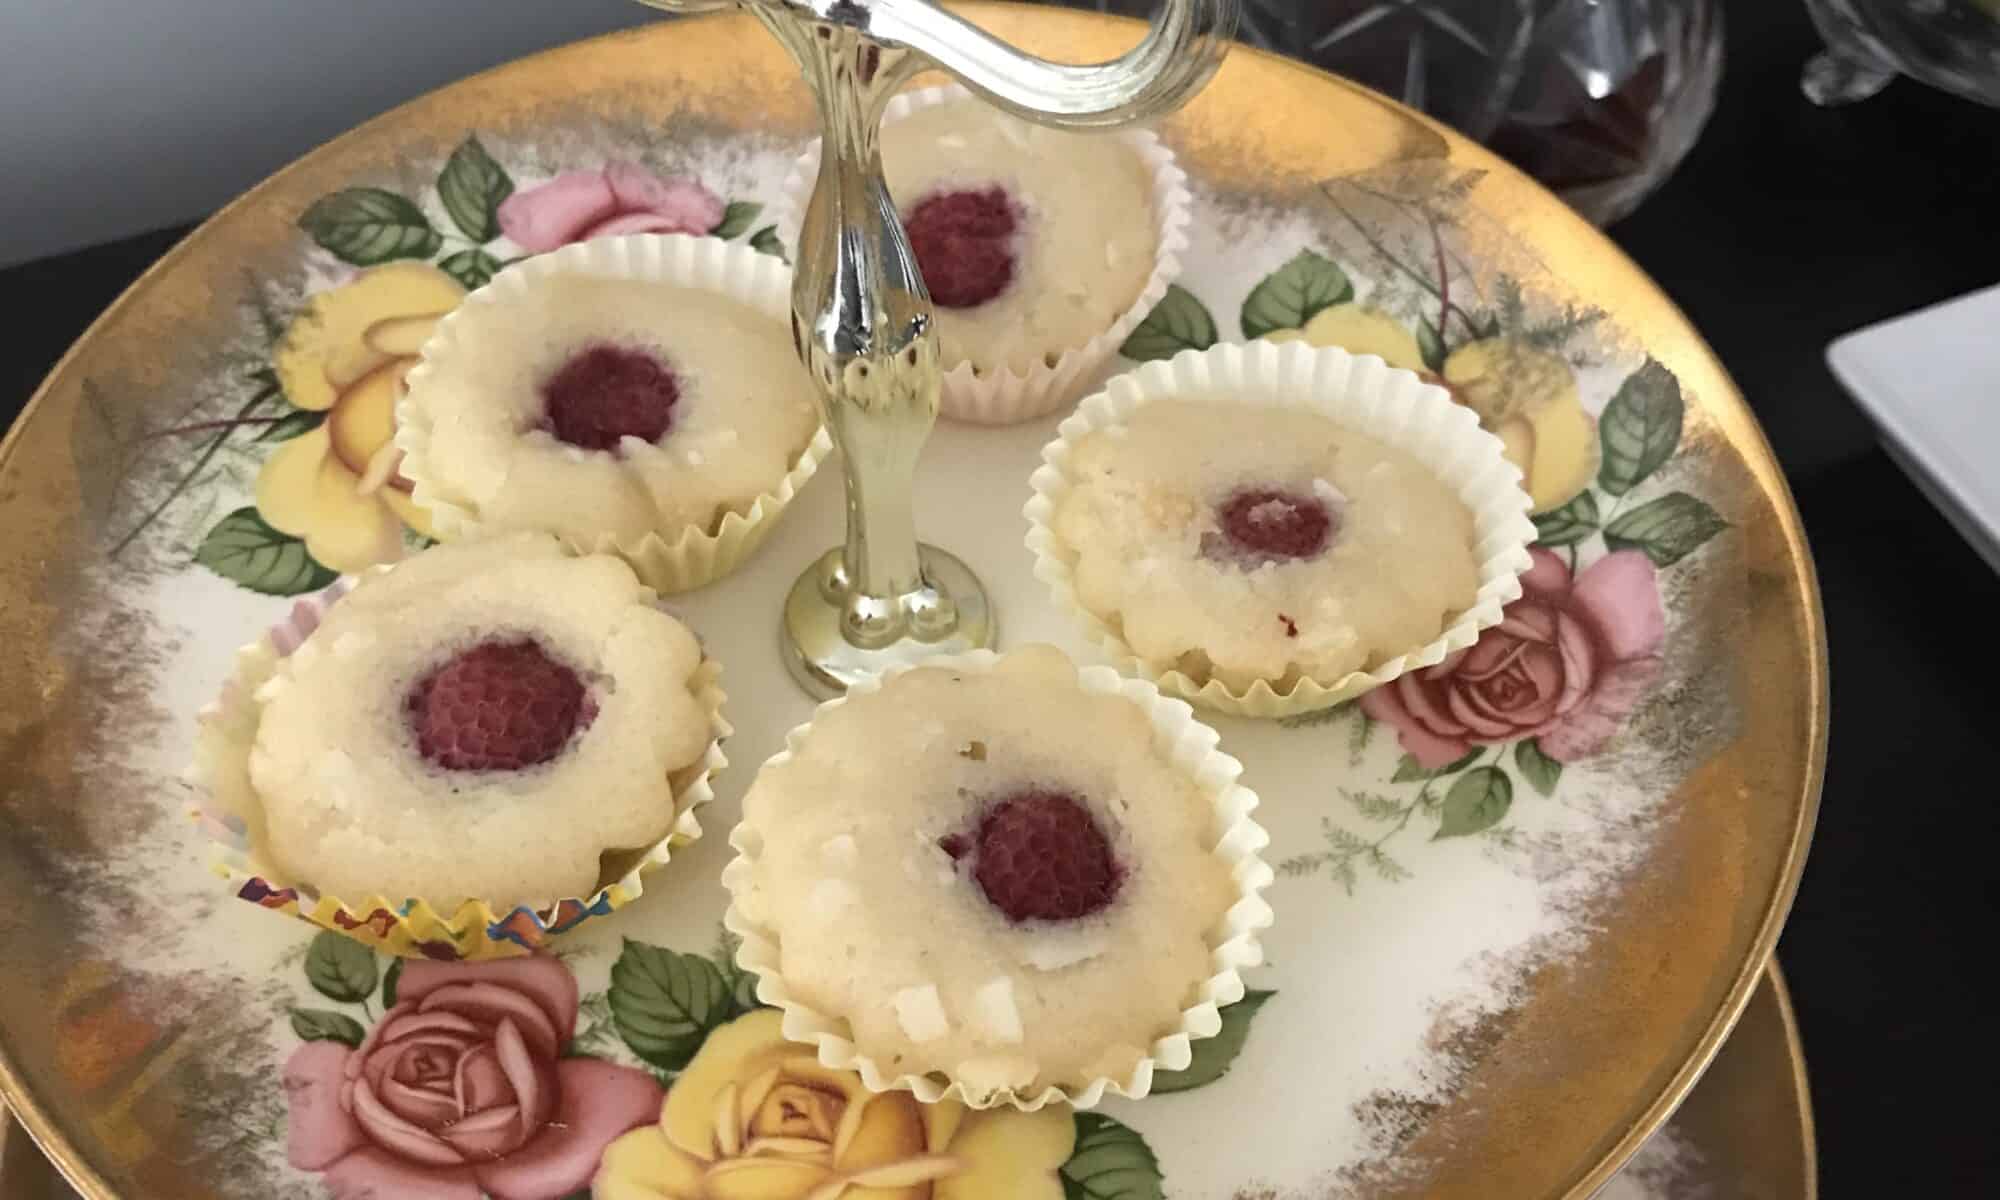 Raspberry Friands on a tiered tea plate.